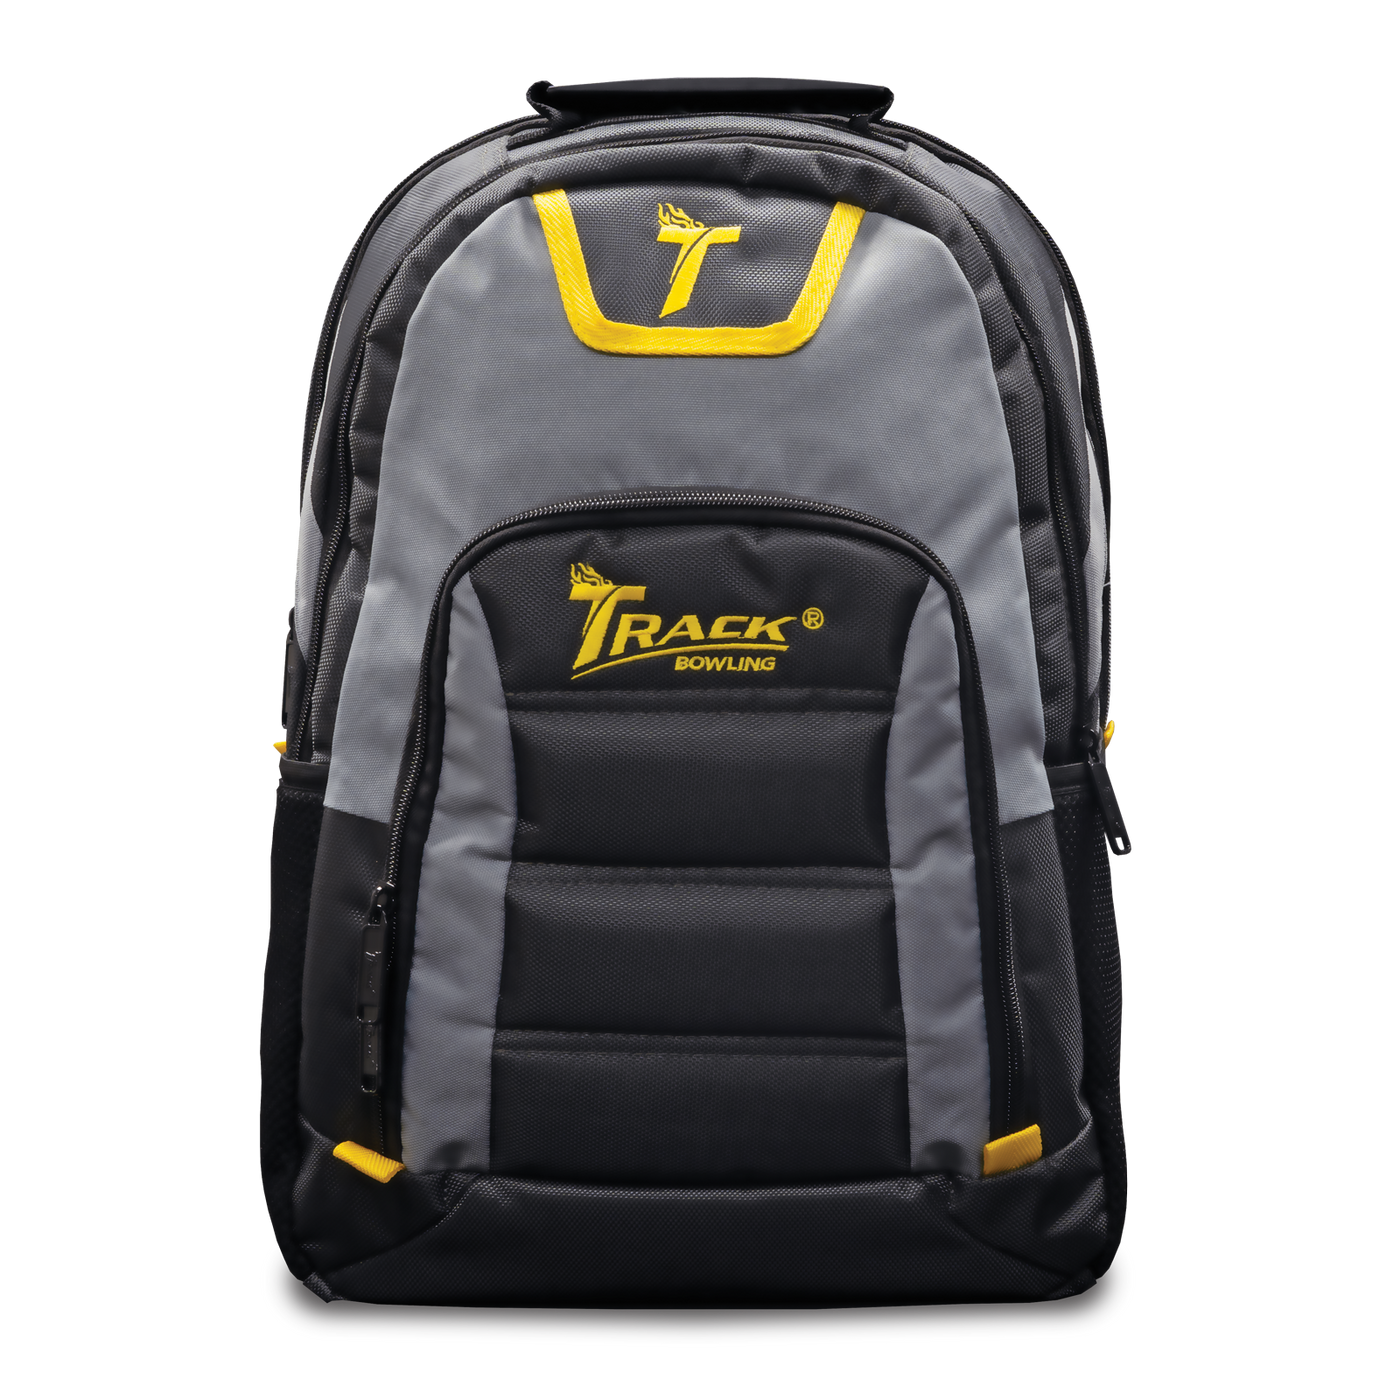 Select Backpack front view in grey, dark grey, and yellow